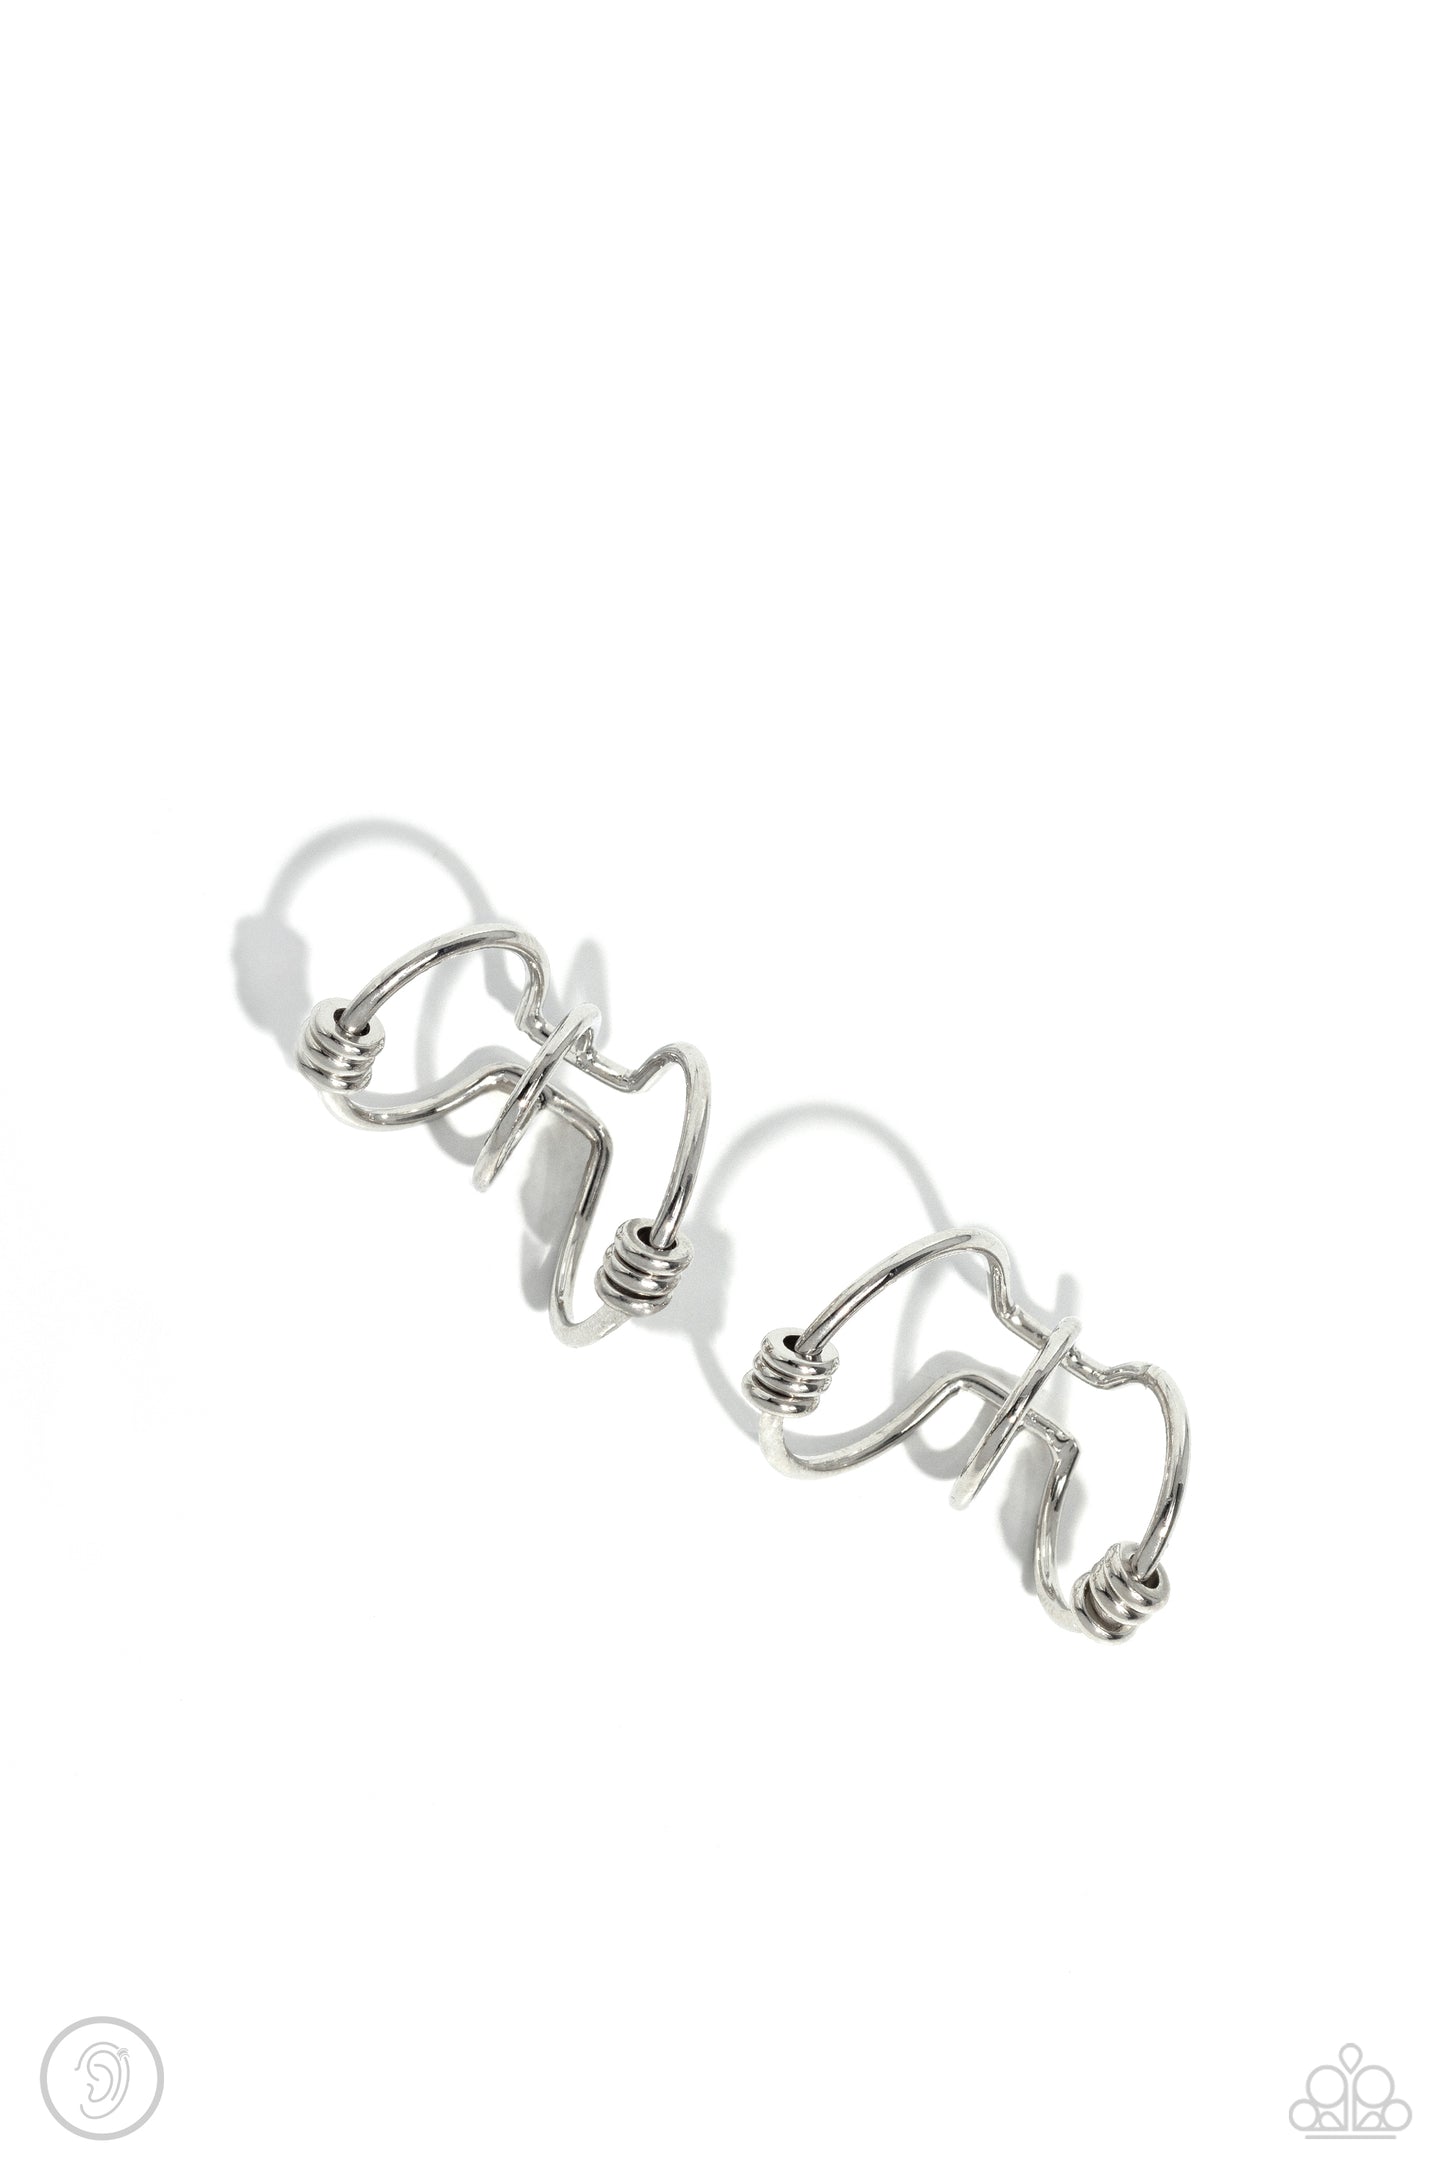 Mobile Maven Silver Cuff Earring - Paparazzi Accessories  A collection of dainty silver discs haphazardly dot across a trio of airy, dainty silver bars that curve around the ear to create an adjustable, one-size-fits-all cuff.  Sold as one pair of cuff earrings.  P5PO-CFSV-250XX